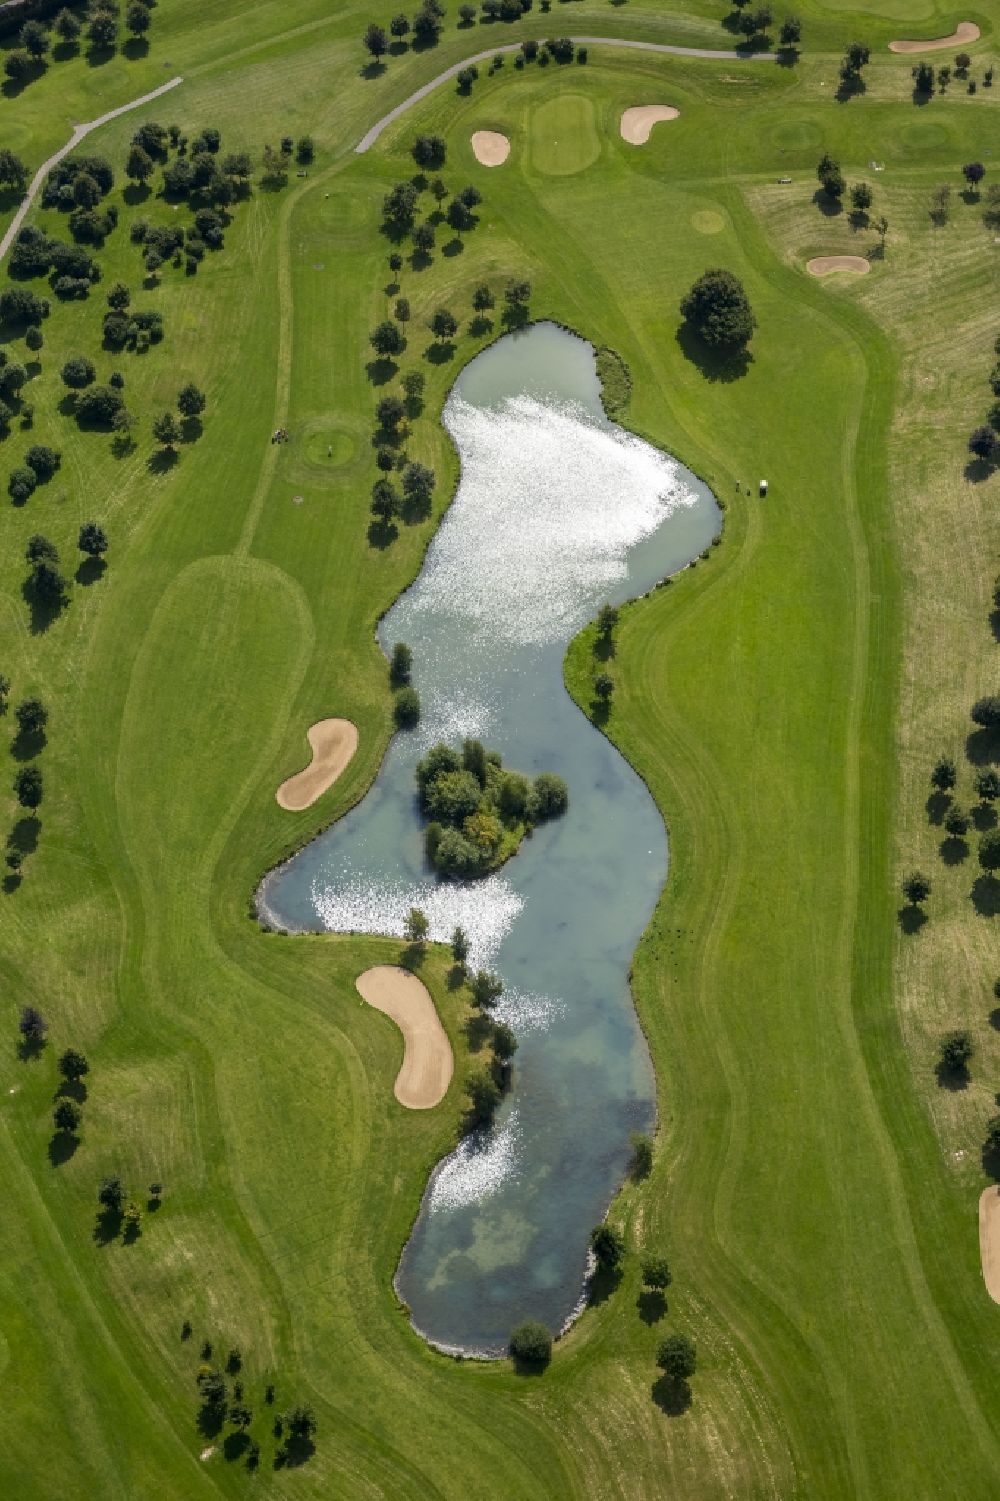 Kamp-Lintfort from the bird's eye view: View of a water hazard on the golf course in Kamp-Lintfort in the state North Rhine-Westphalia. The golf course belongs to the area of Golfclub am Kloster Kamp e.V.